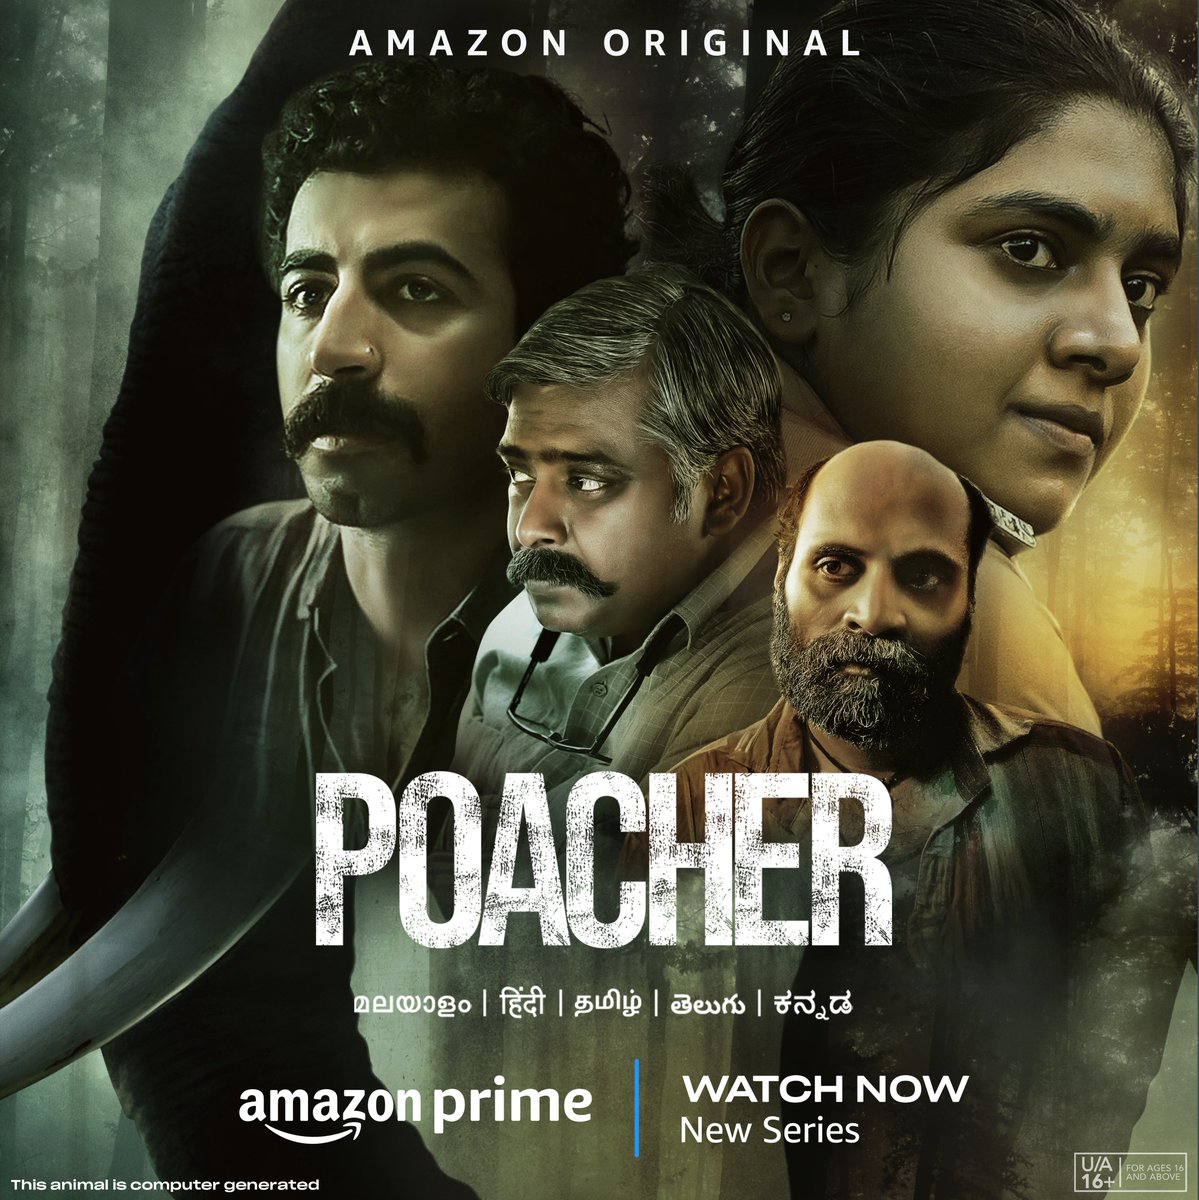 Embark on a journey into the shadowy world of #elephant poaching & uncover how @ForestKerala @WCCBHQ & #WTI dismantled one of India's largest ivory trade rackets. Thanks #RichieMehta @aliaa08 @PrimeVideoIN for conveying a crucial conservation message through this gripping series